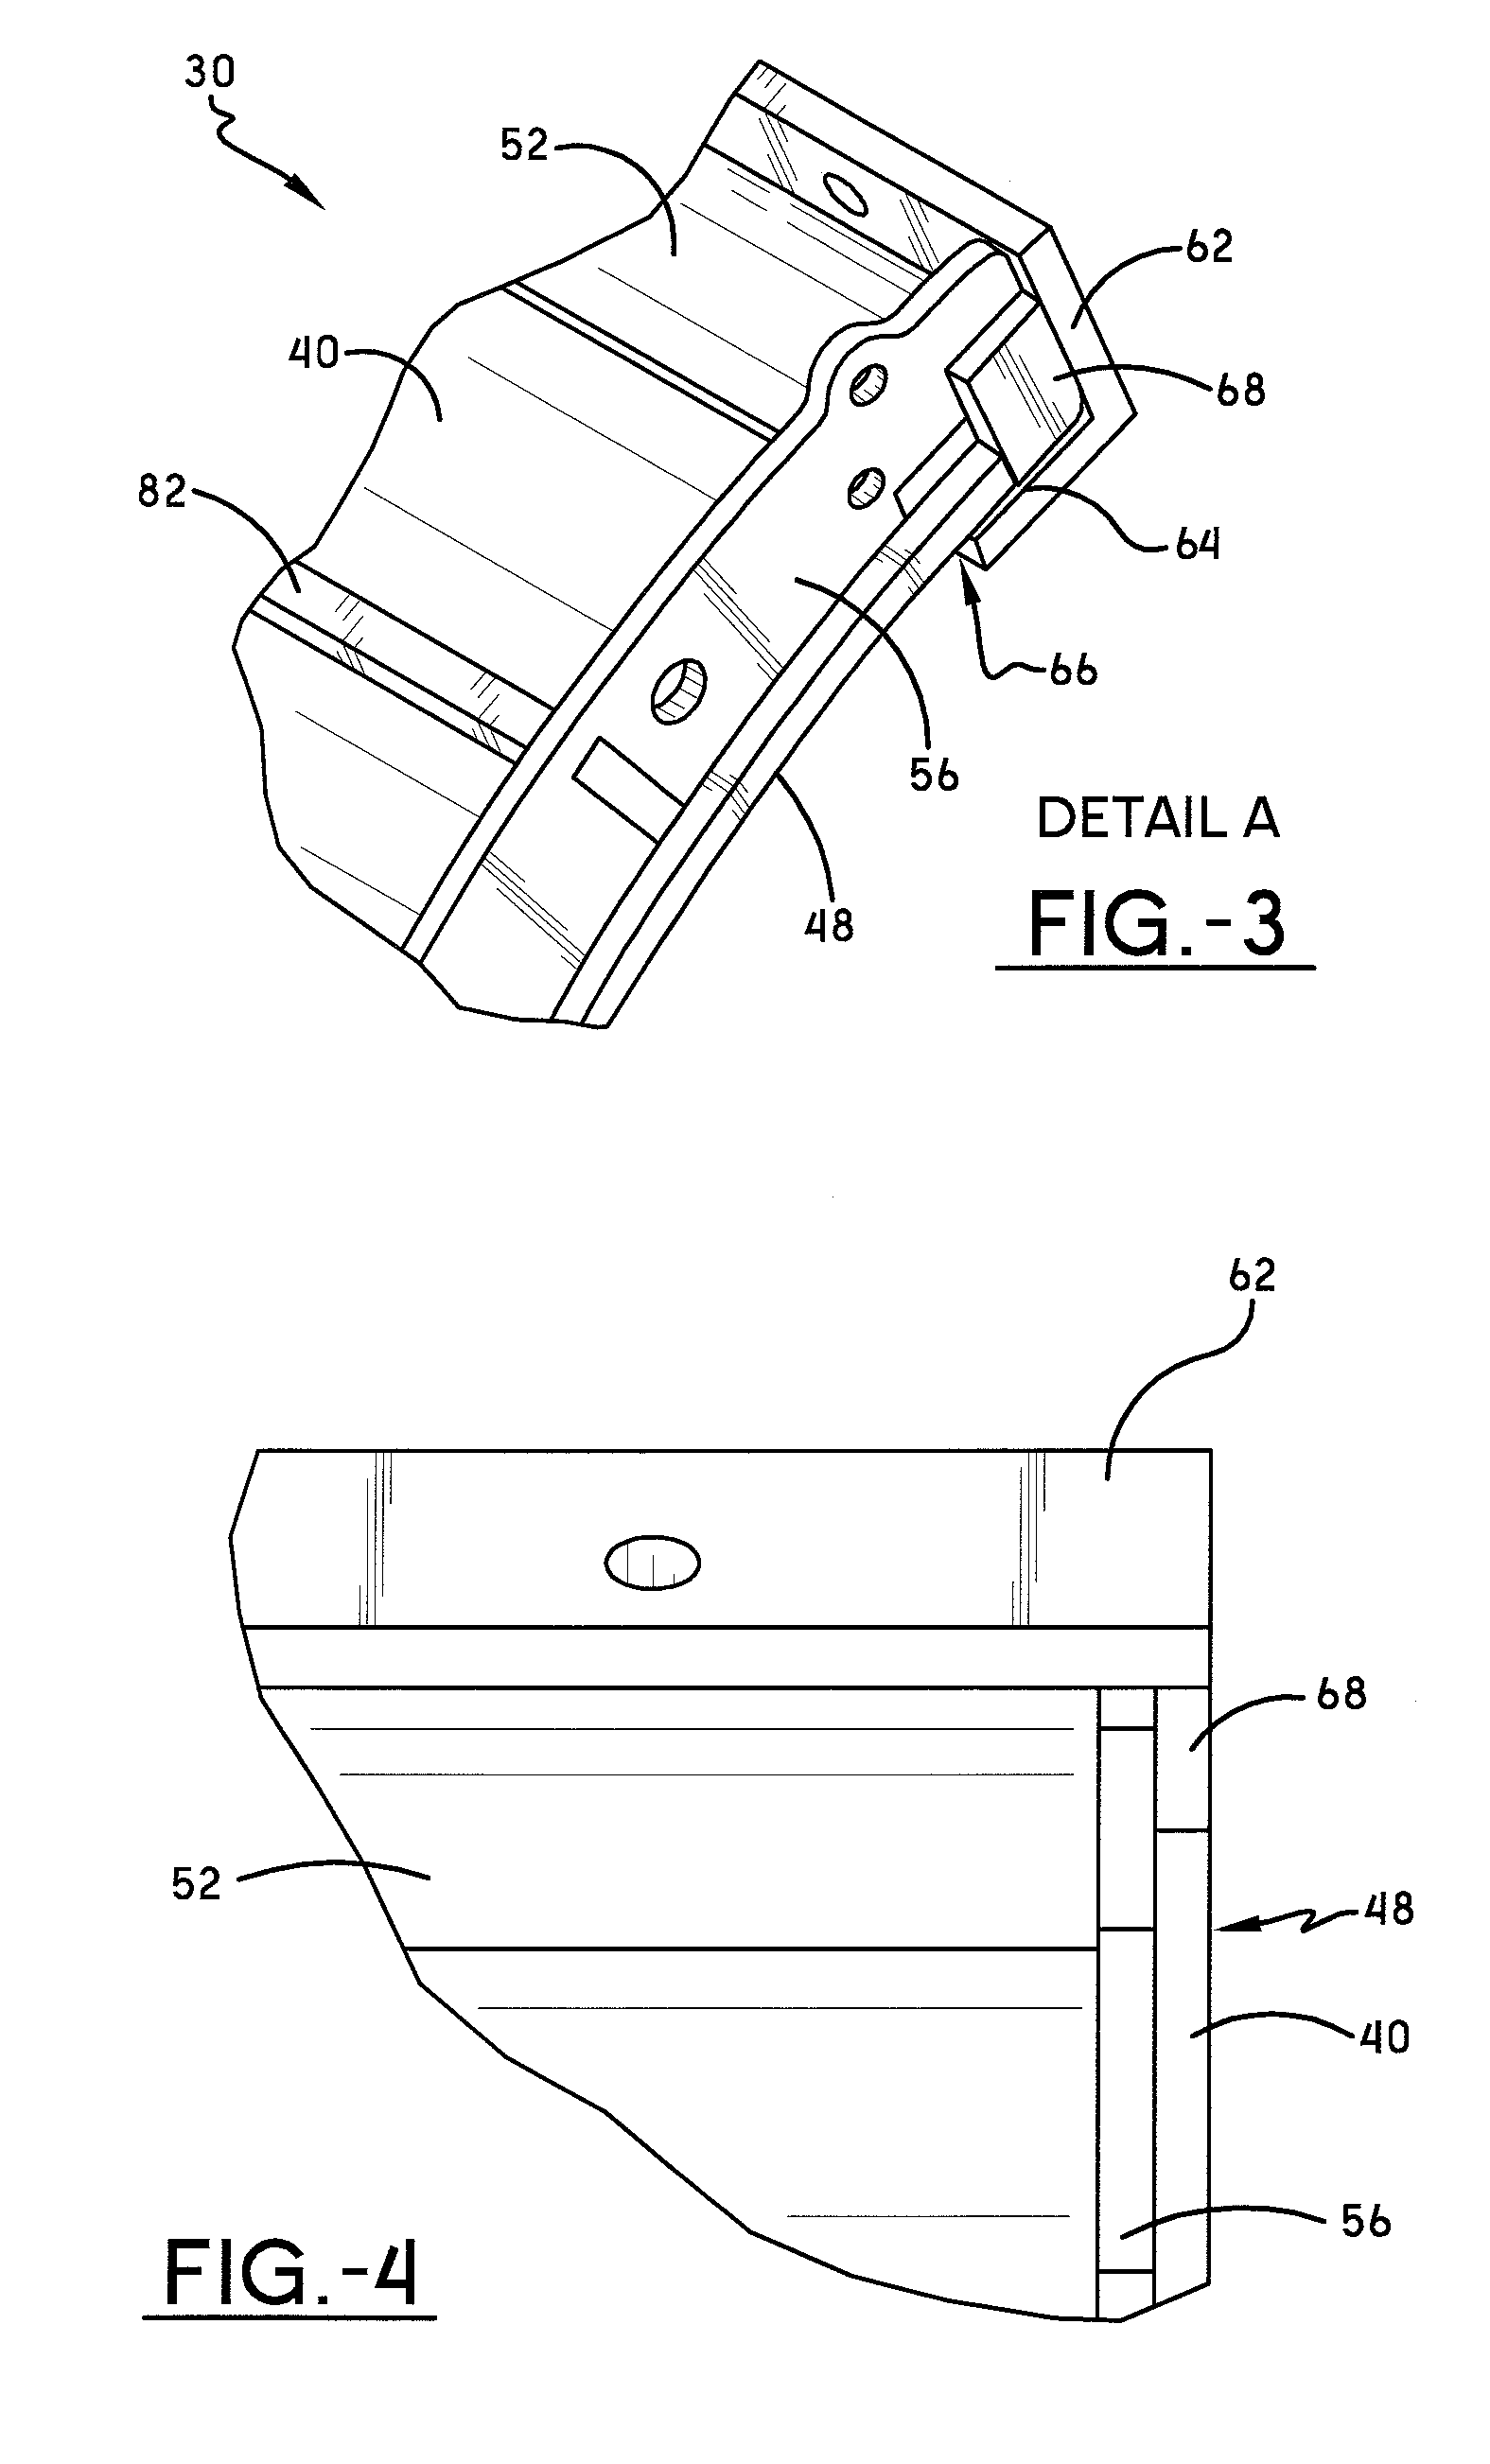 Method and apparatus for attaching a moldboard to a moldboard frame